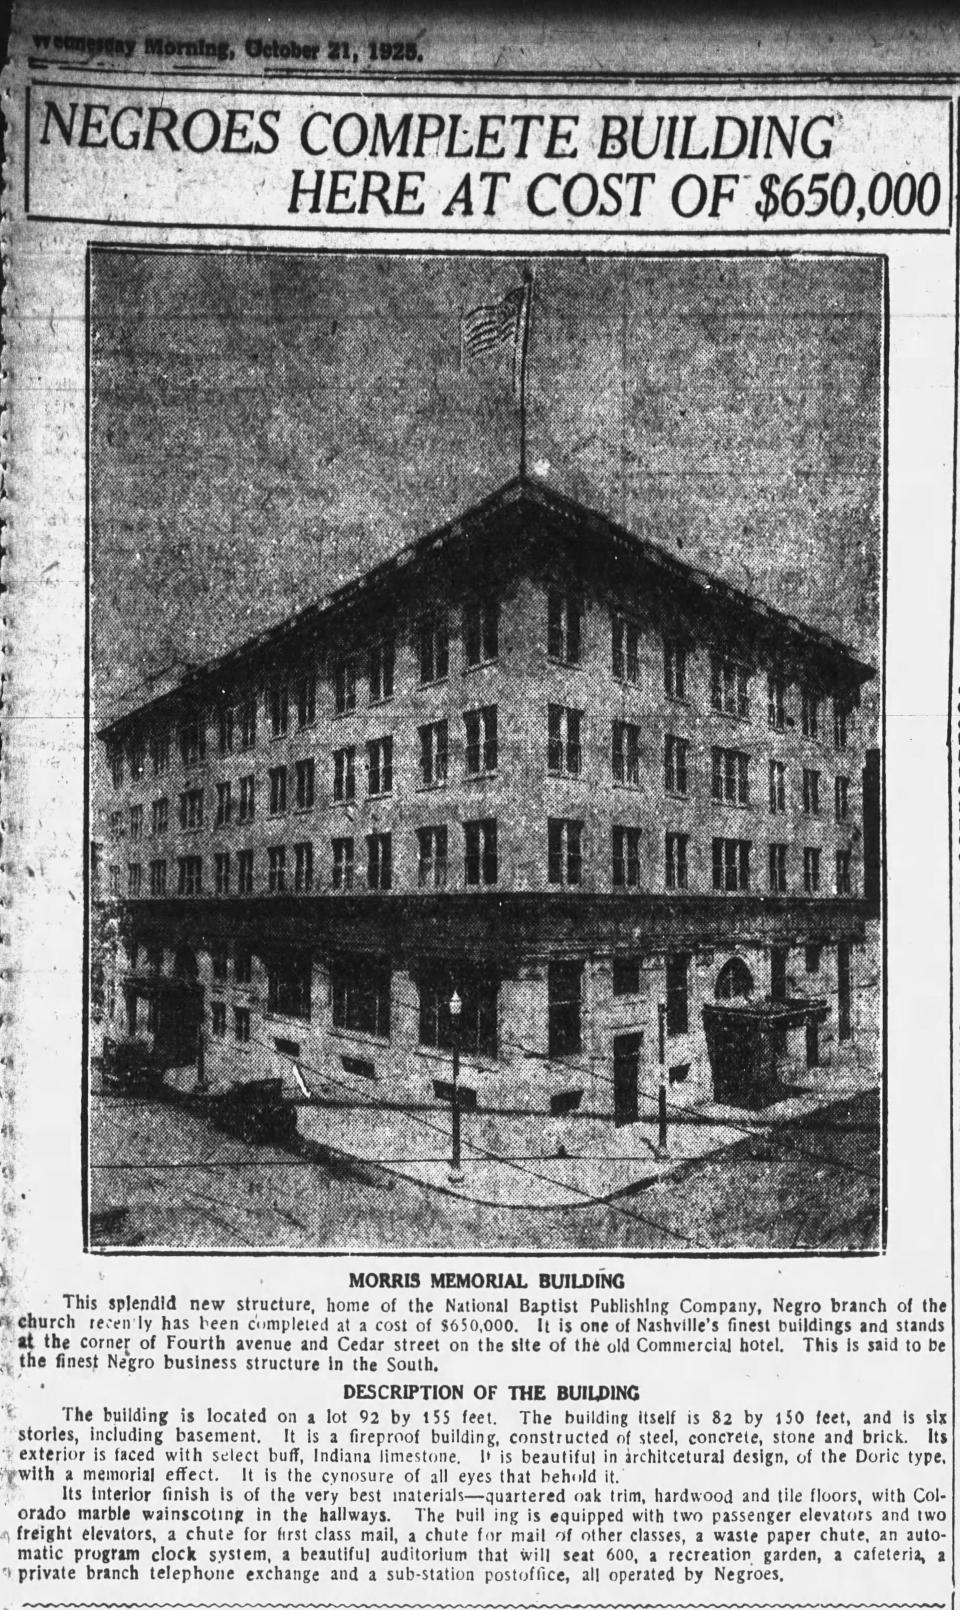 An Oct. 21, 1925 edition of The Tennessean reports the completion of the Morris Memorial Building, built by McKissack & McKissack for the National Baptist Convention. The building opened in 1926.